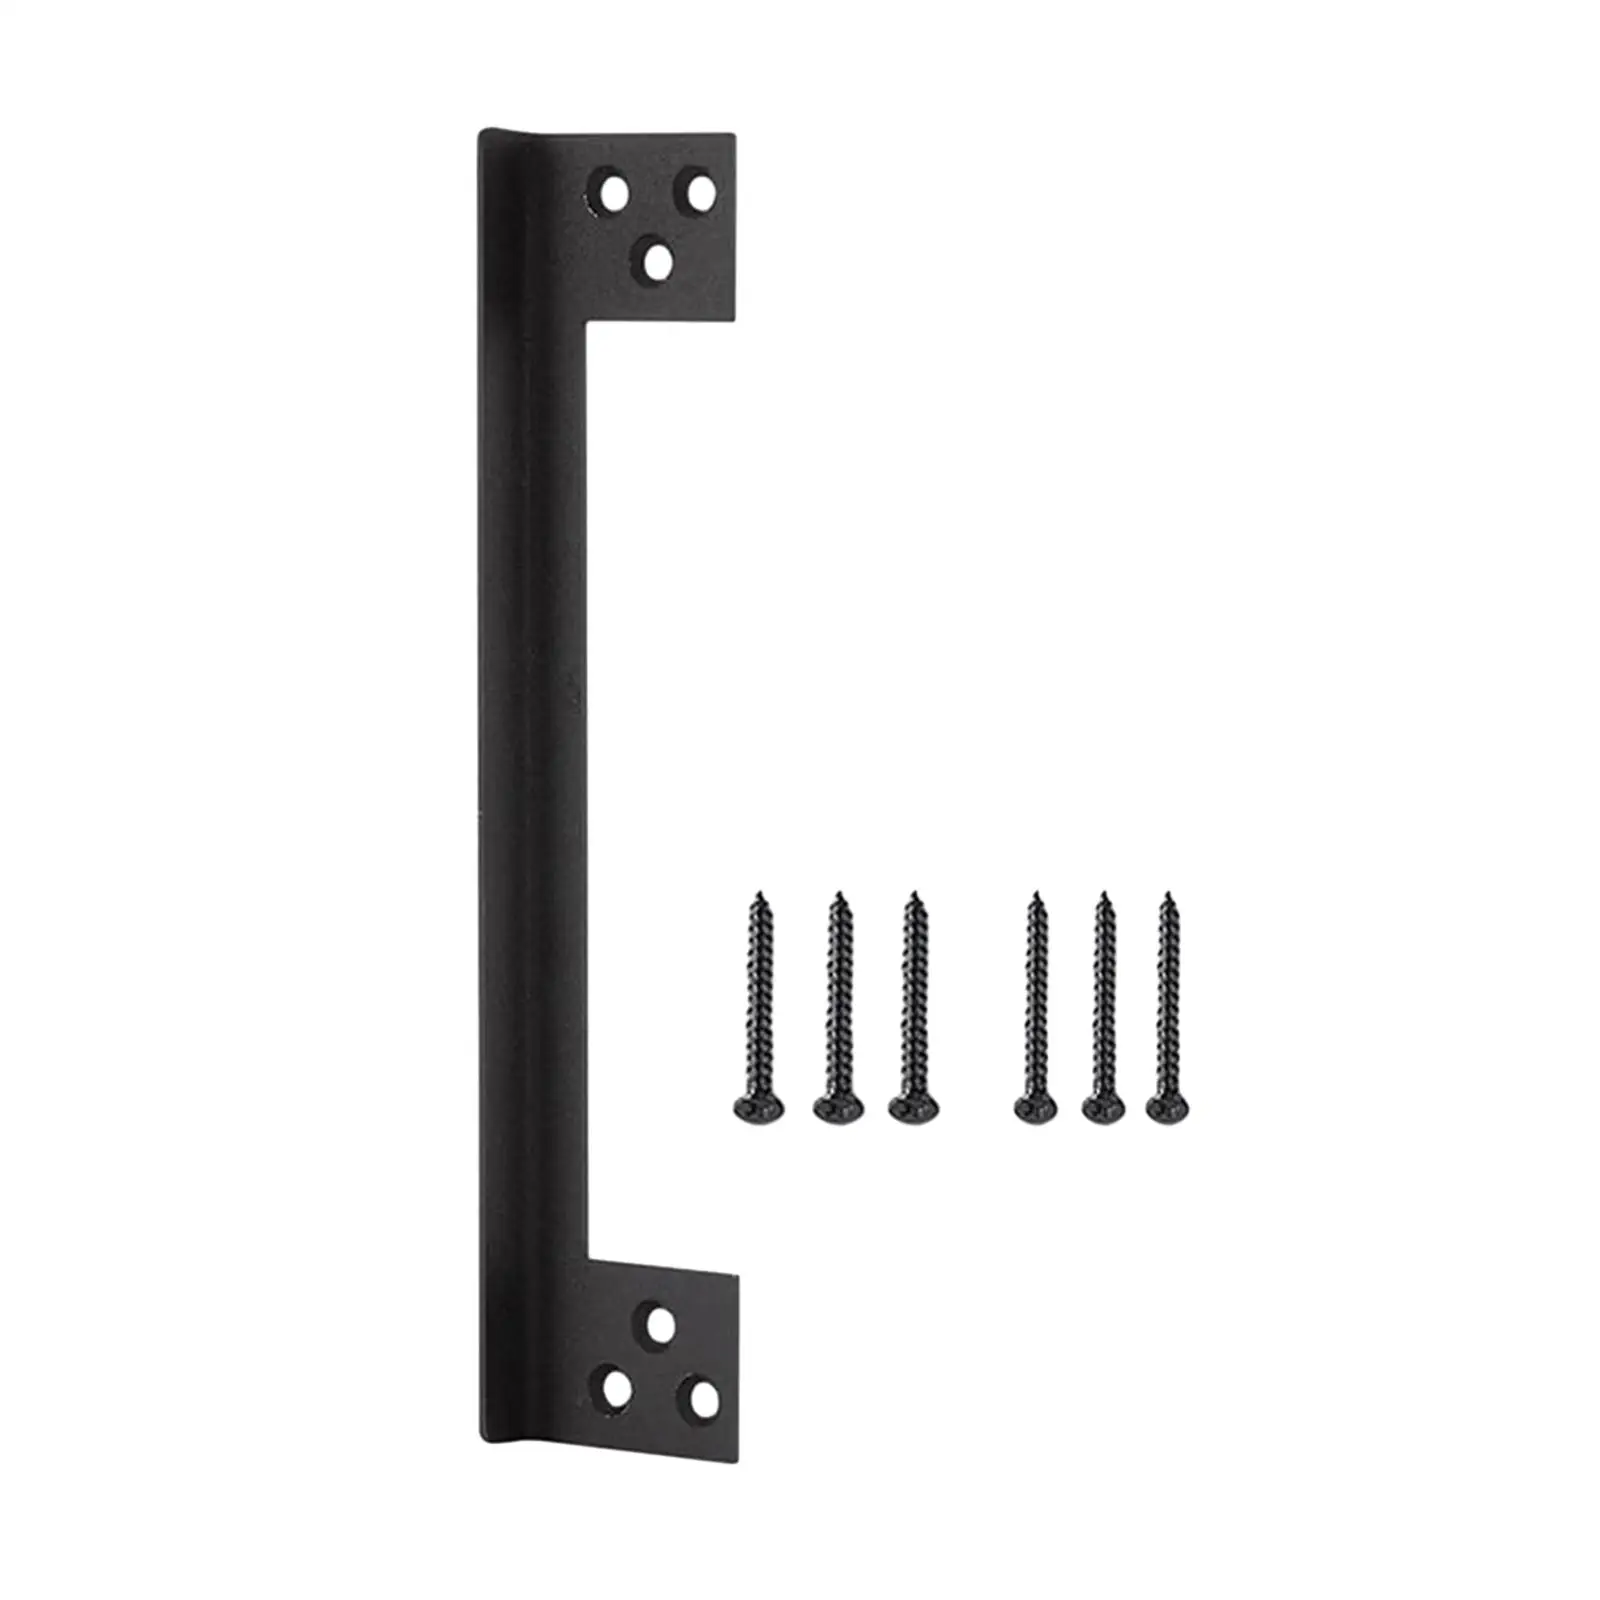 Door Latch Guard Plate Protect against Forced Entry Black for Left or Right Hand Doors Outswing Door Security Protector L Shaped